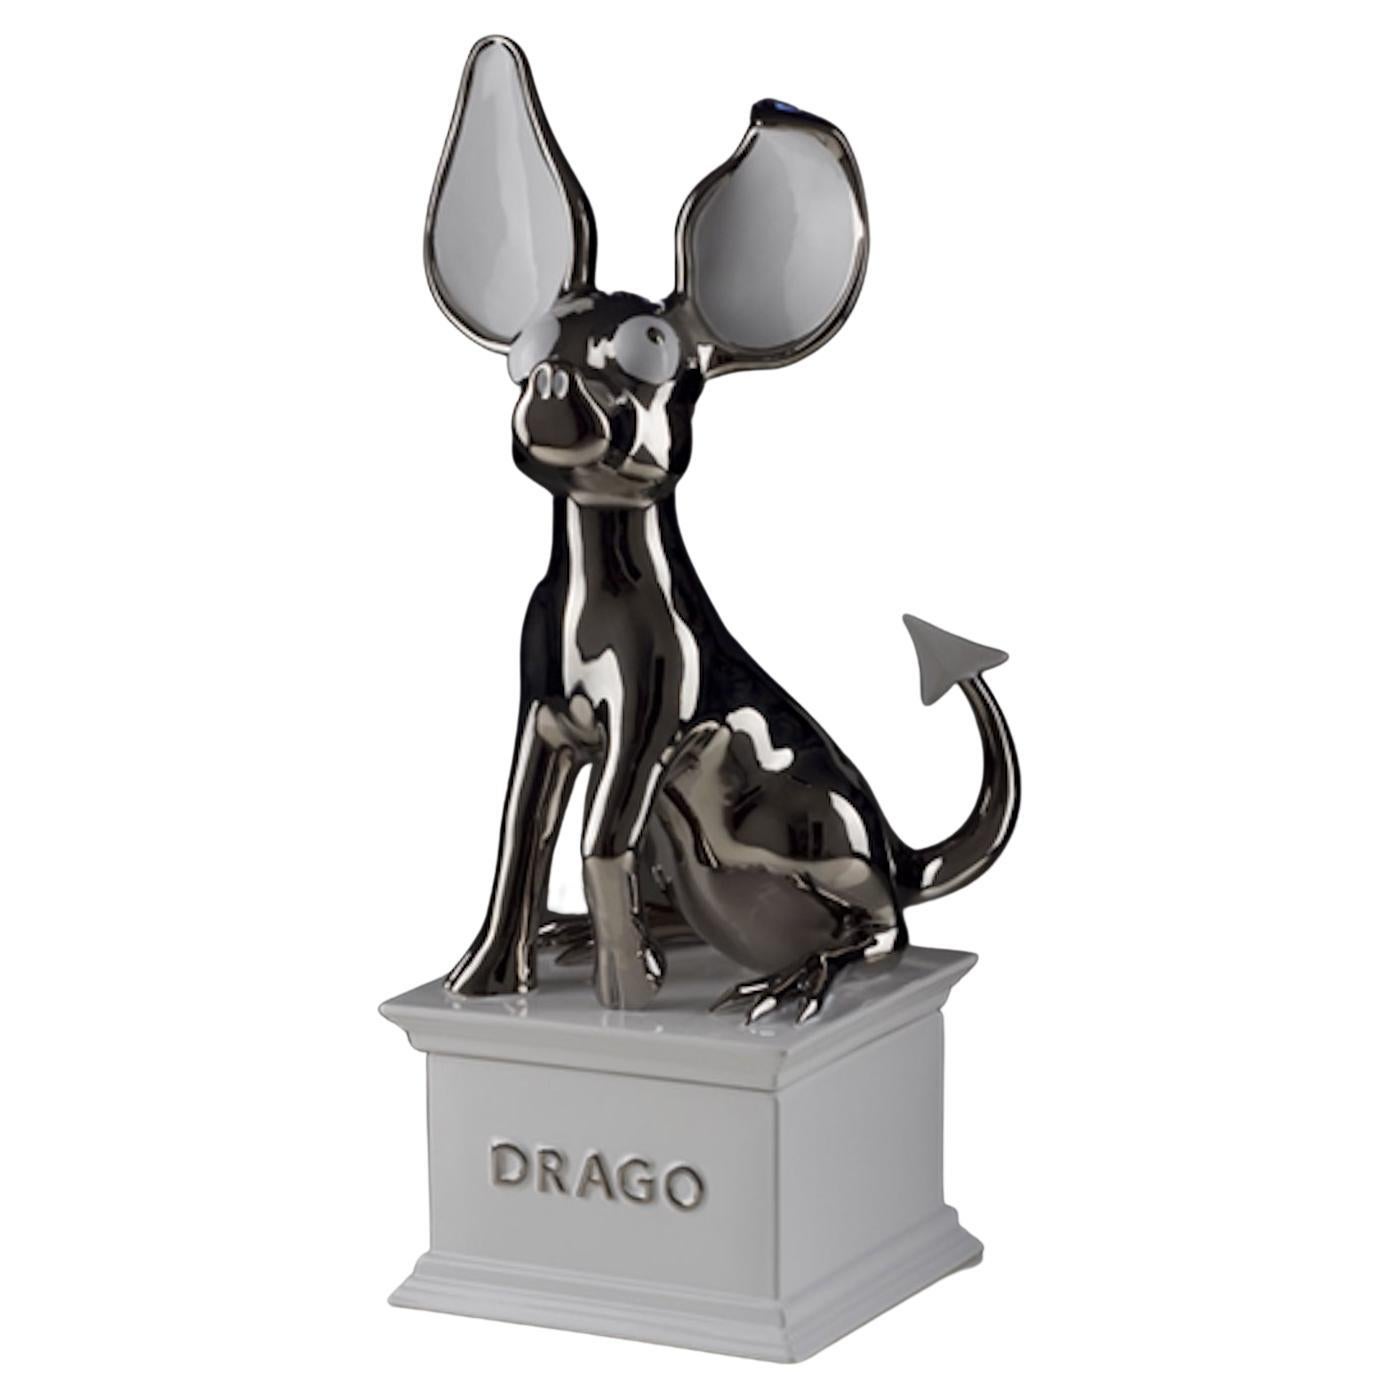 Drago Ceramic Sculpture by Matteo Cibic for Superego Editions, Italy